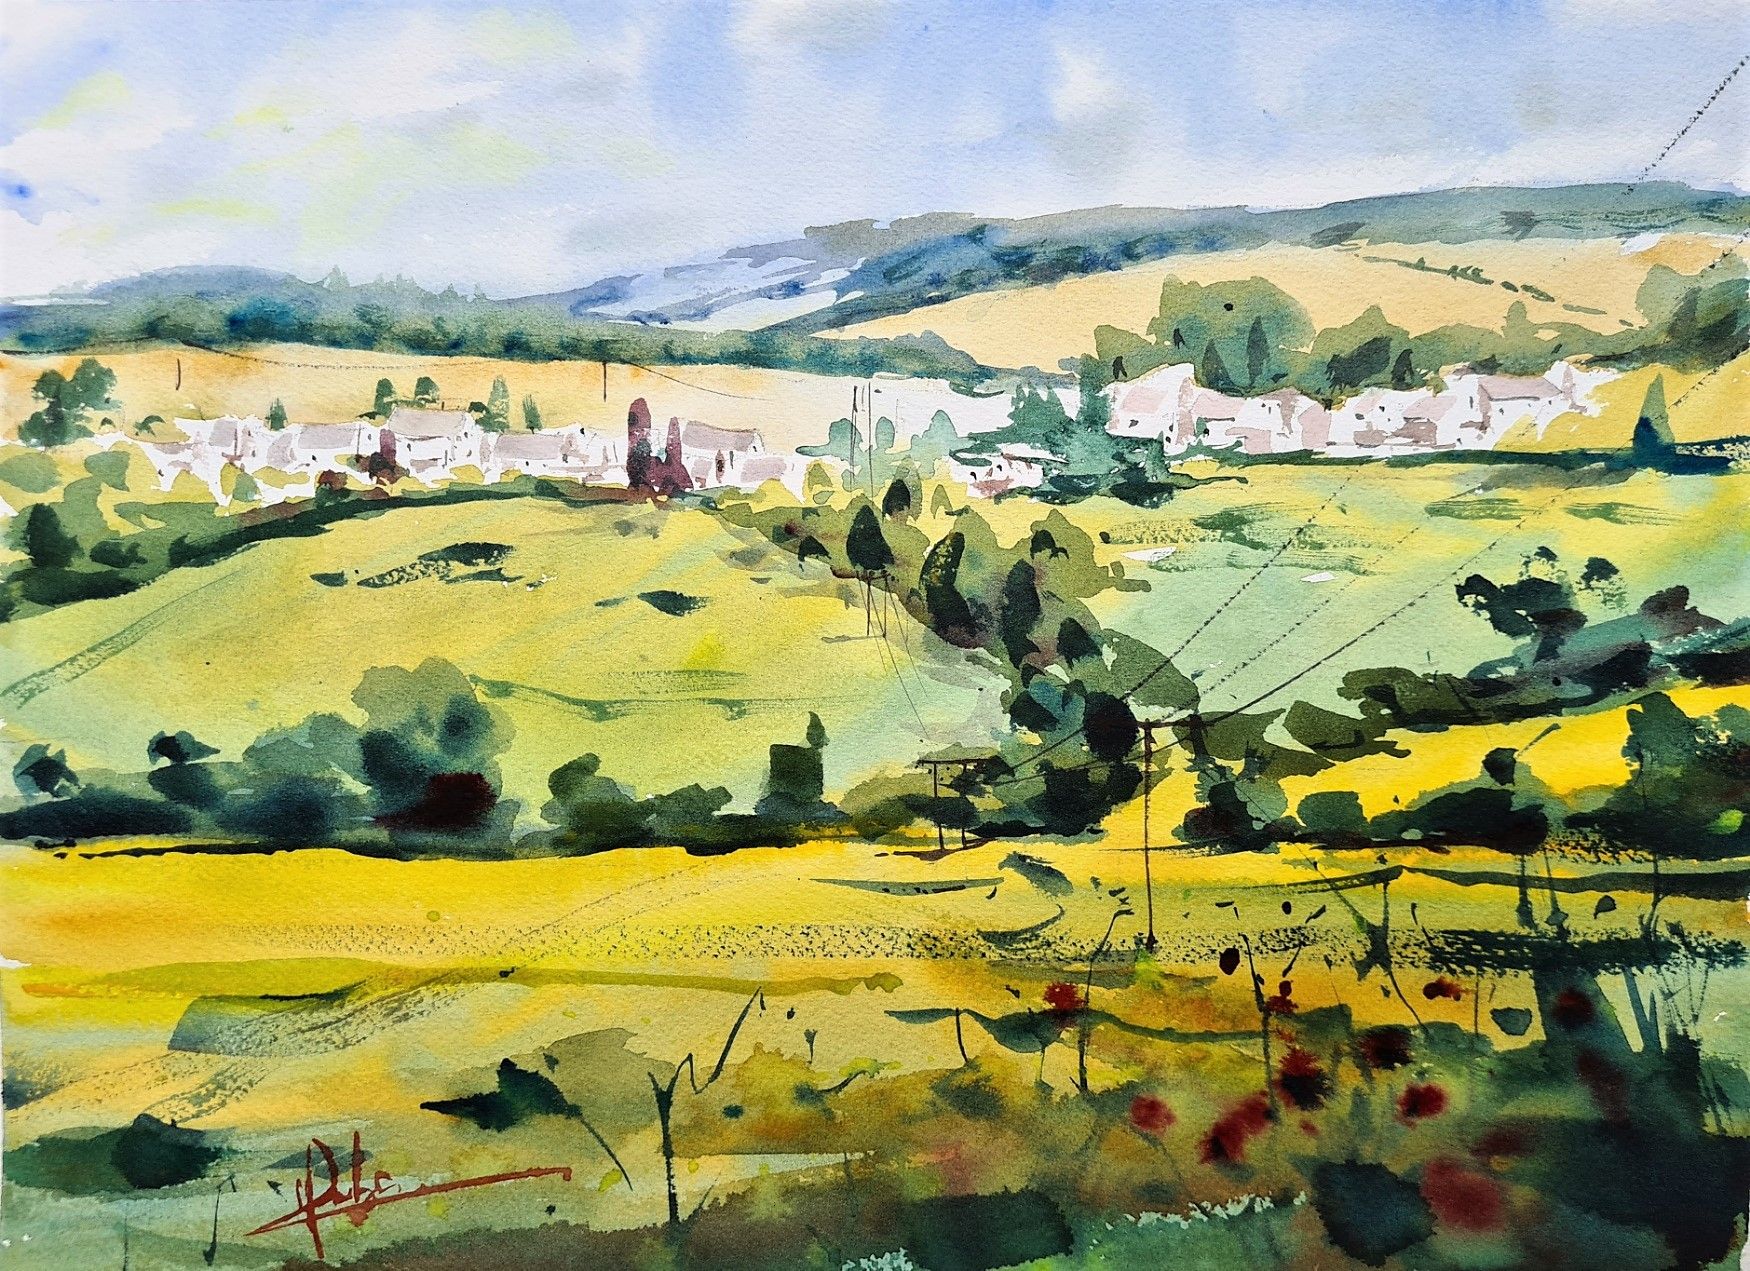 Whiteshill, Stroud, Gloucestershire by Max Panks